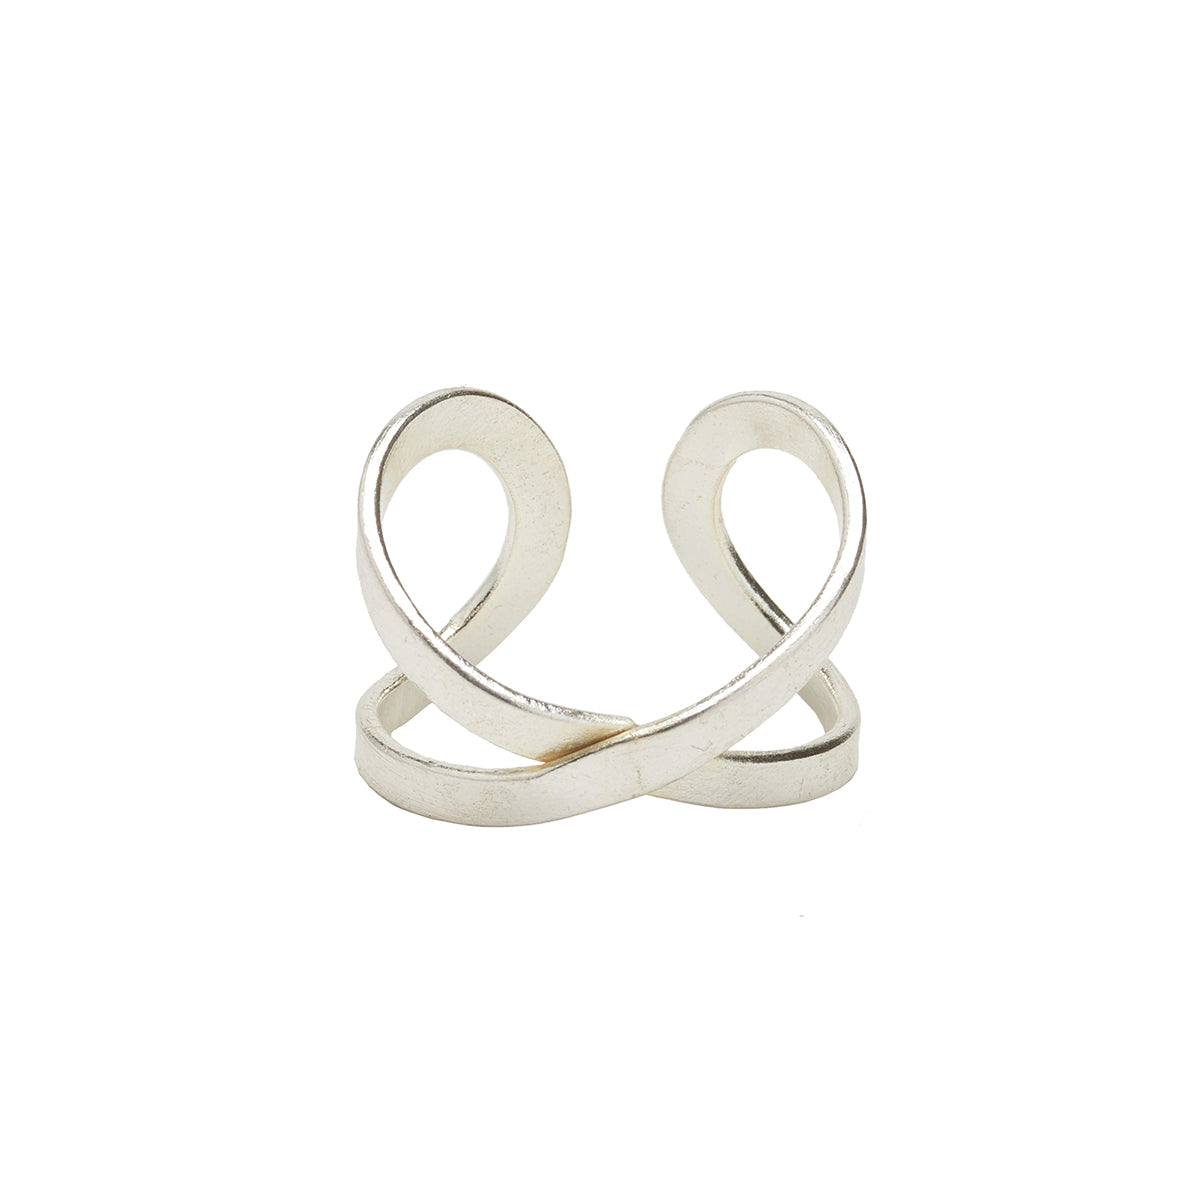 Angelco Accessories Infinity ring - silver